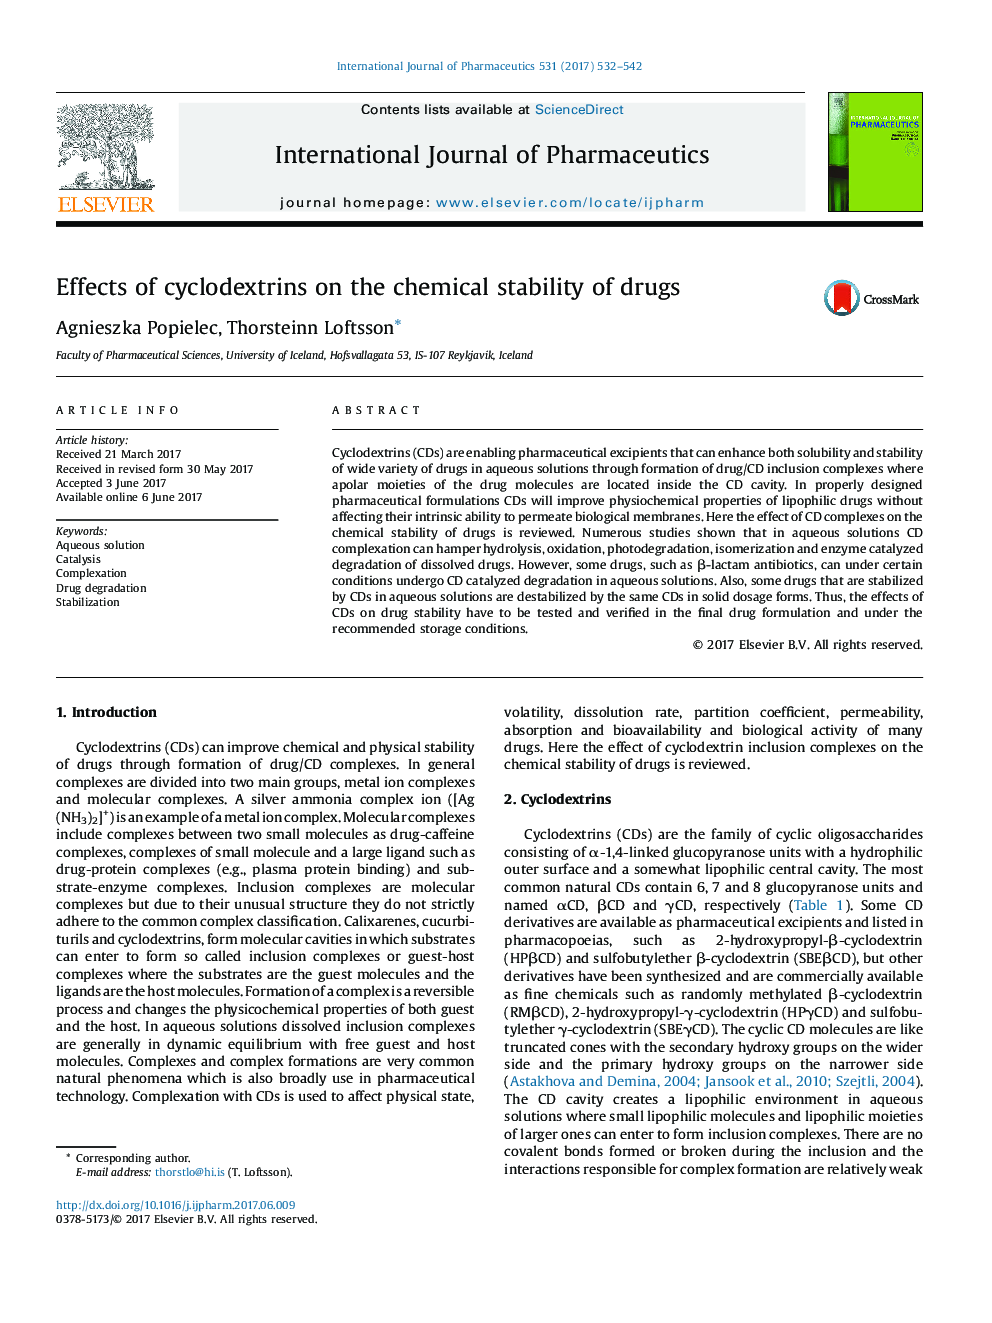 Effects of cyclodextrins on the chemical stability of drugs